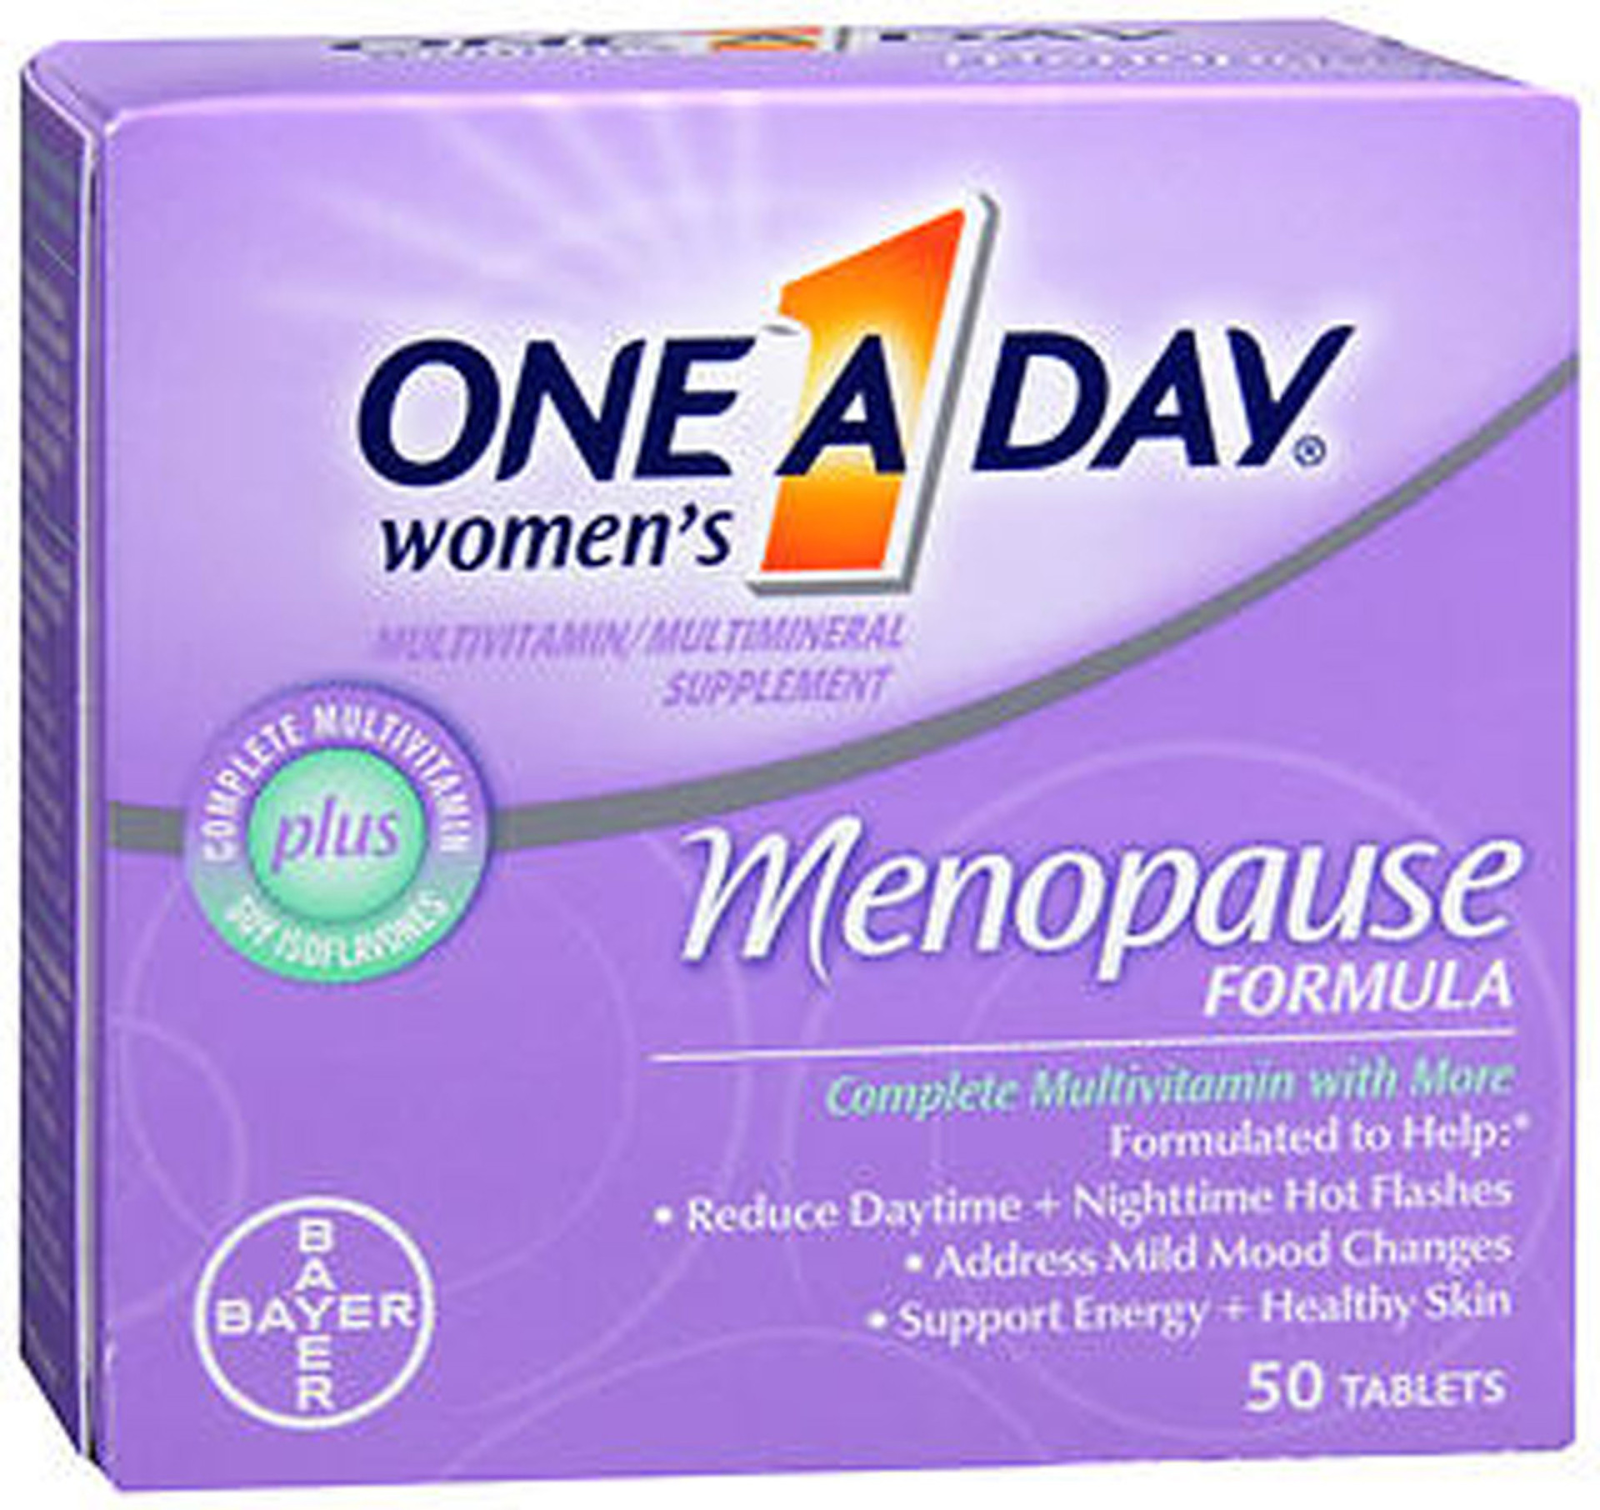 One-A-Day Women's Menopause Formula Multivitamin/Multimineral Tablets - 50 ct